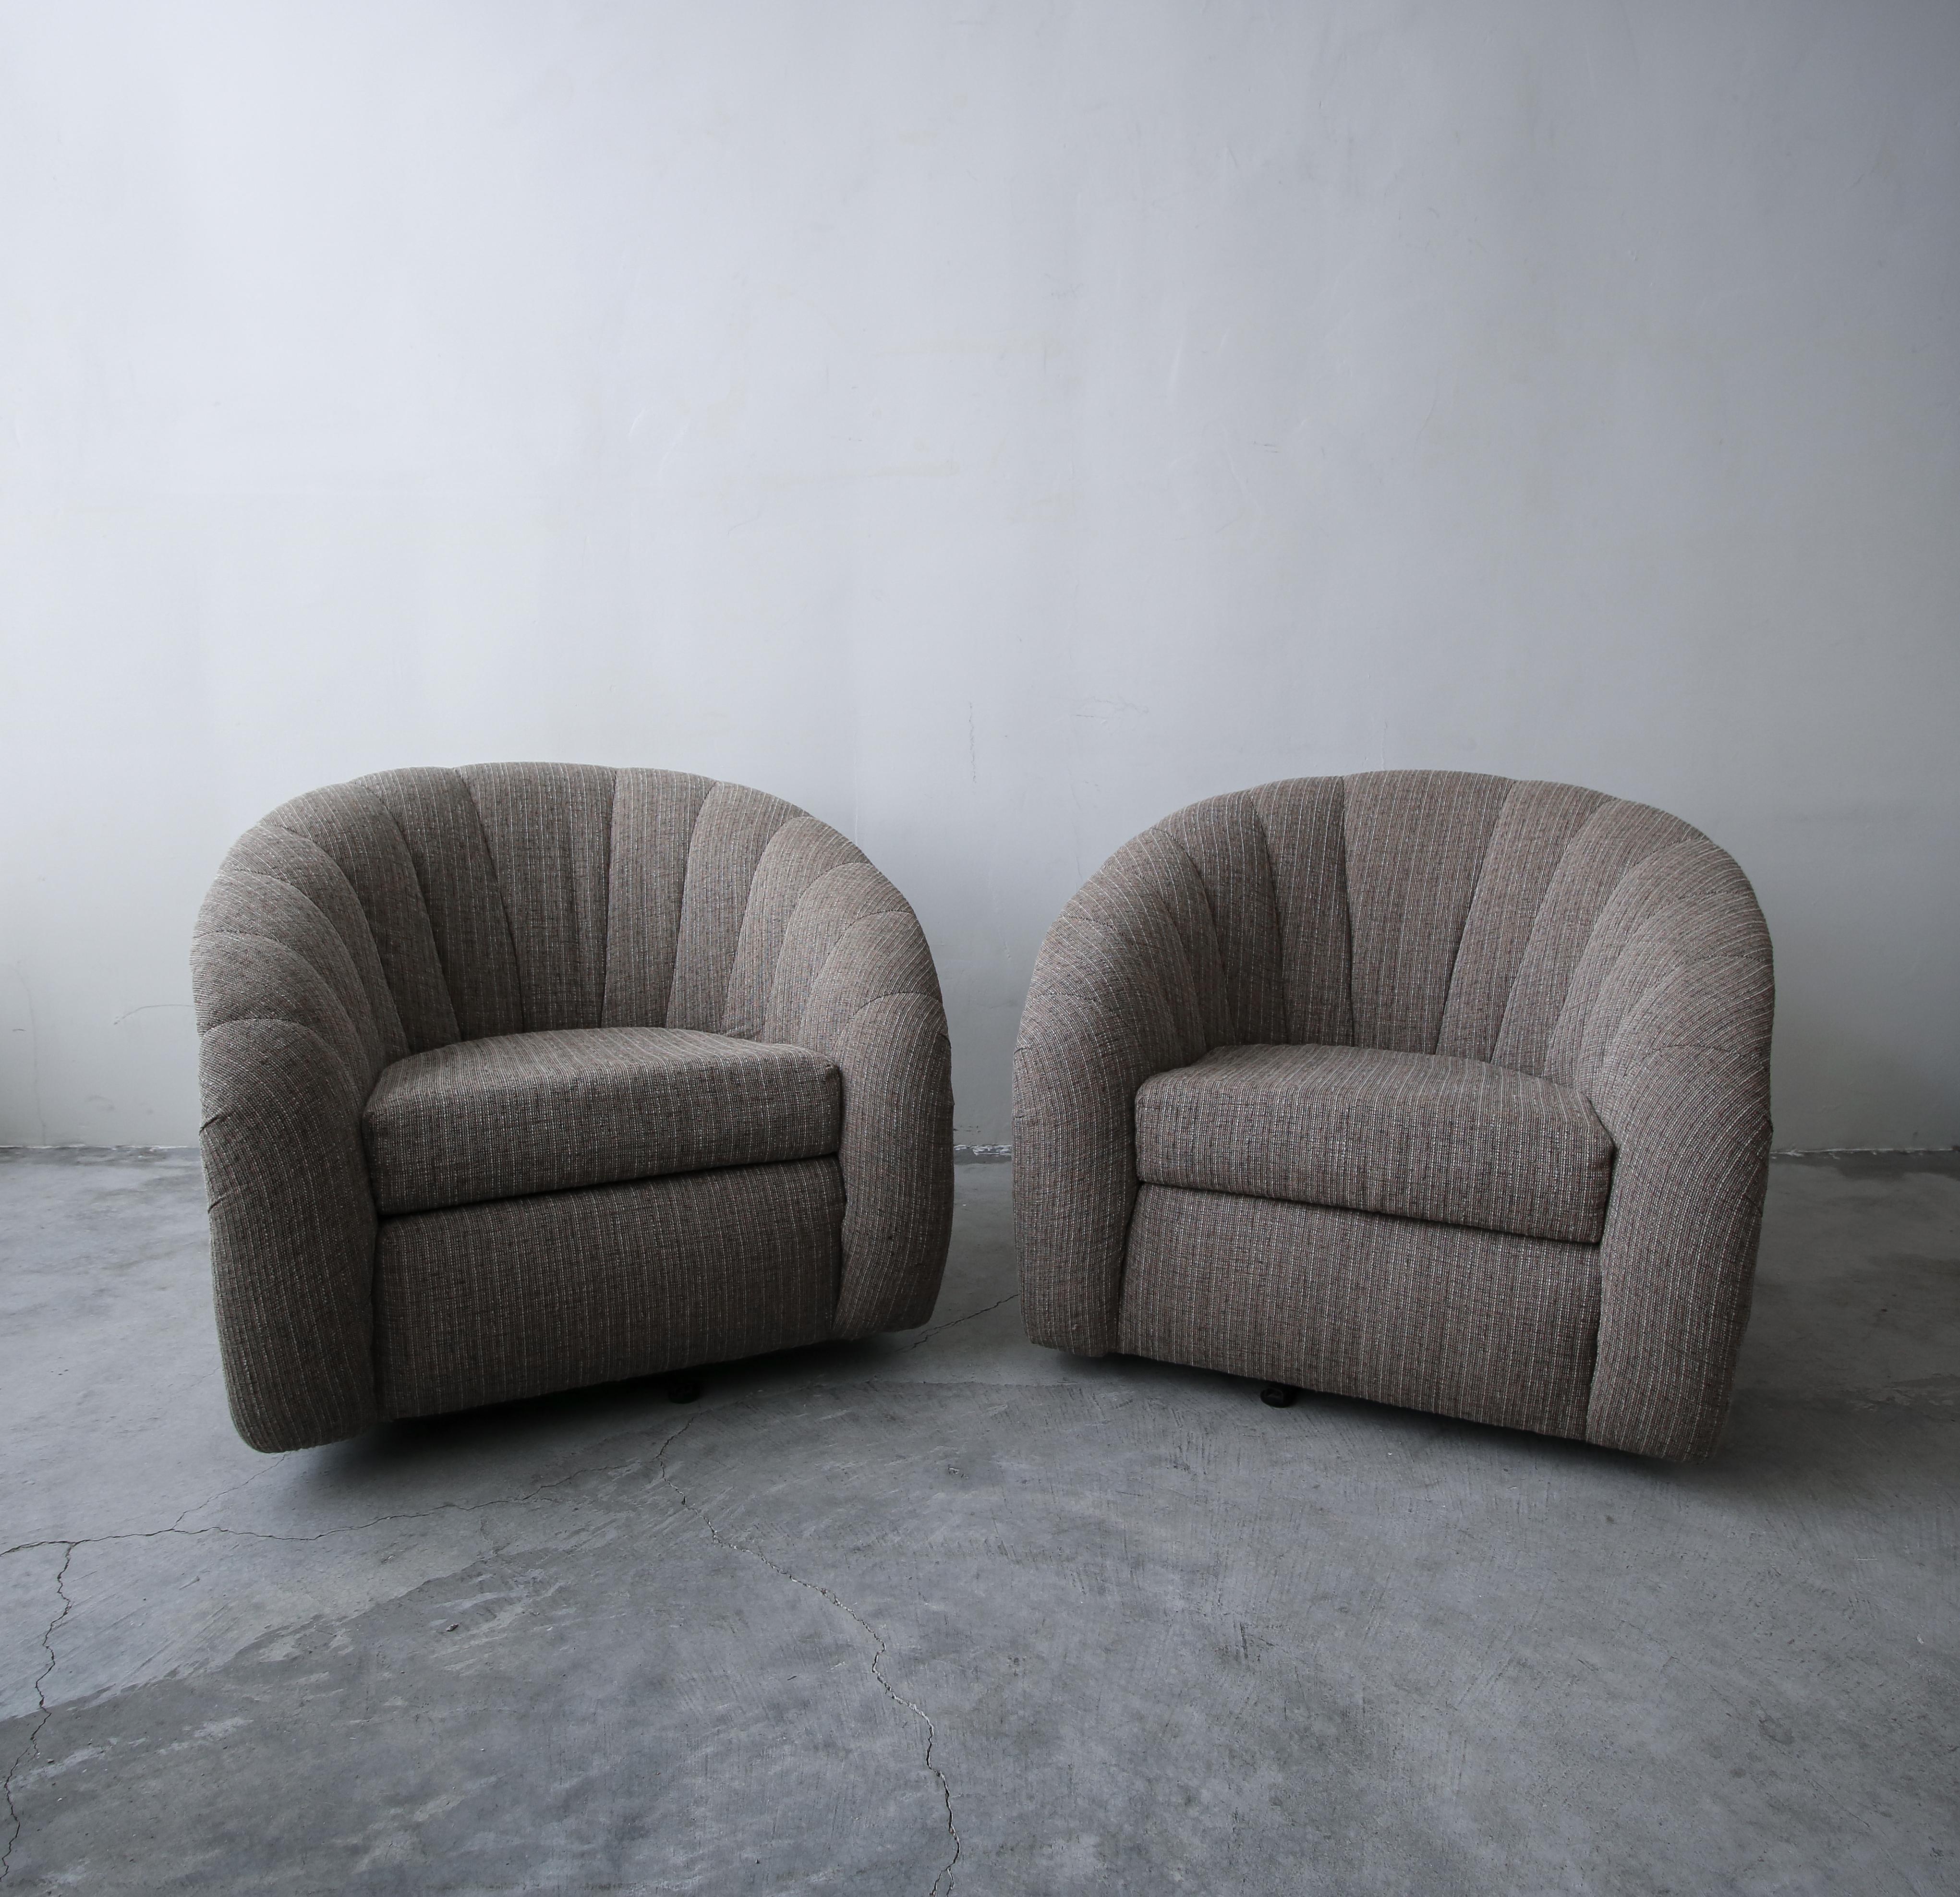 Nice oversized pair of barrel swivel chairs by Sally Sirkin Lewis for J. Robert Scott.

Chairs sold as found. Fabric is in good usable condition with no odors, rips, tears or stains, minimal wear. Chairs swivel well.